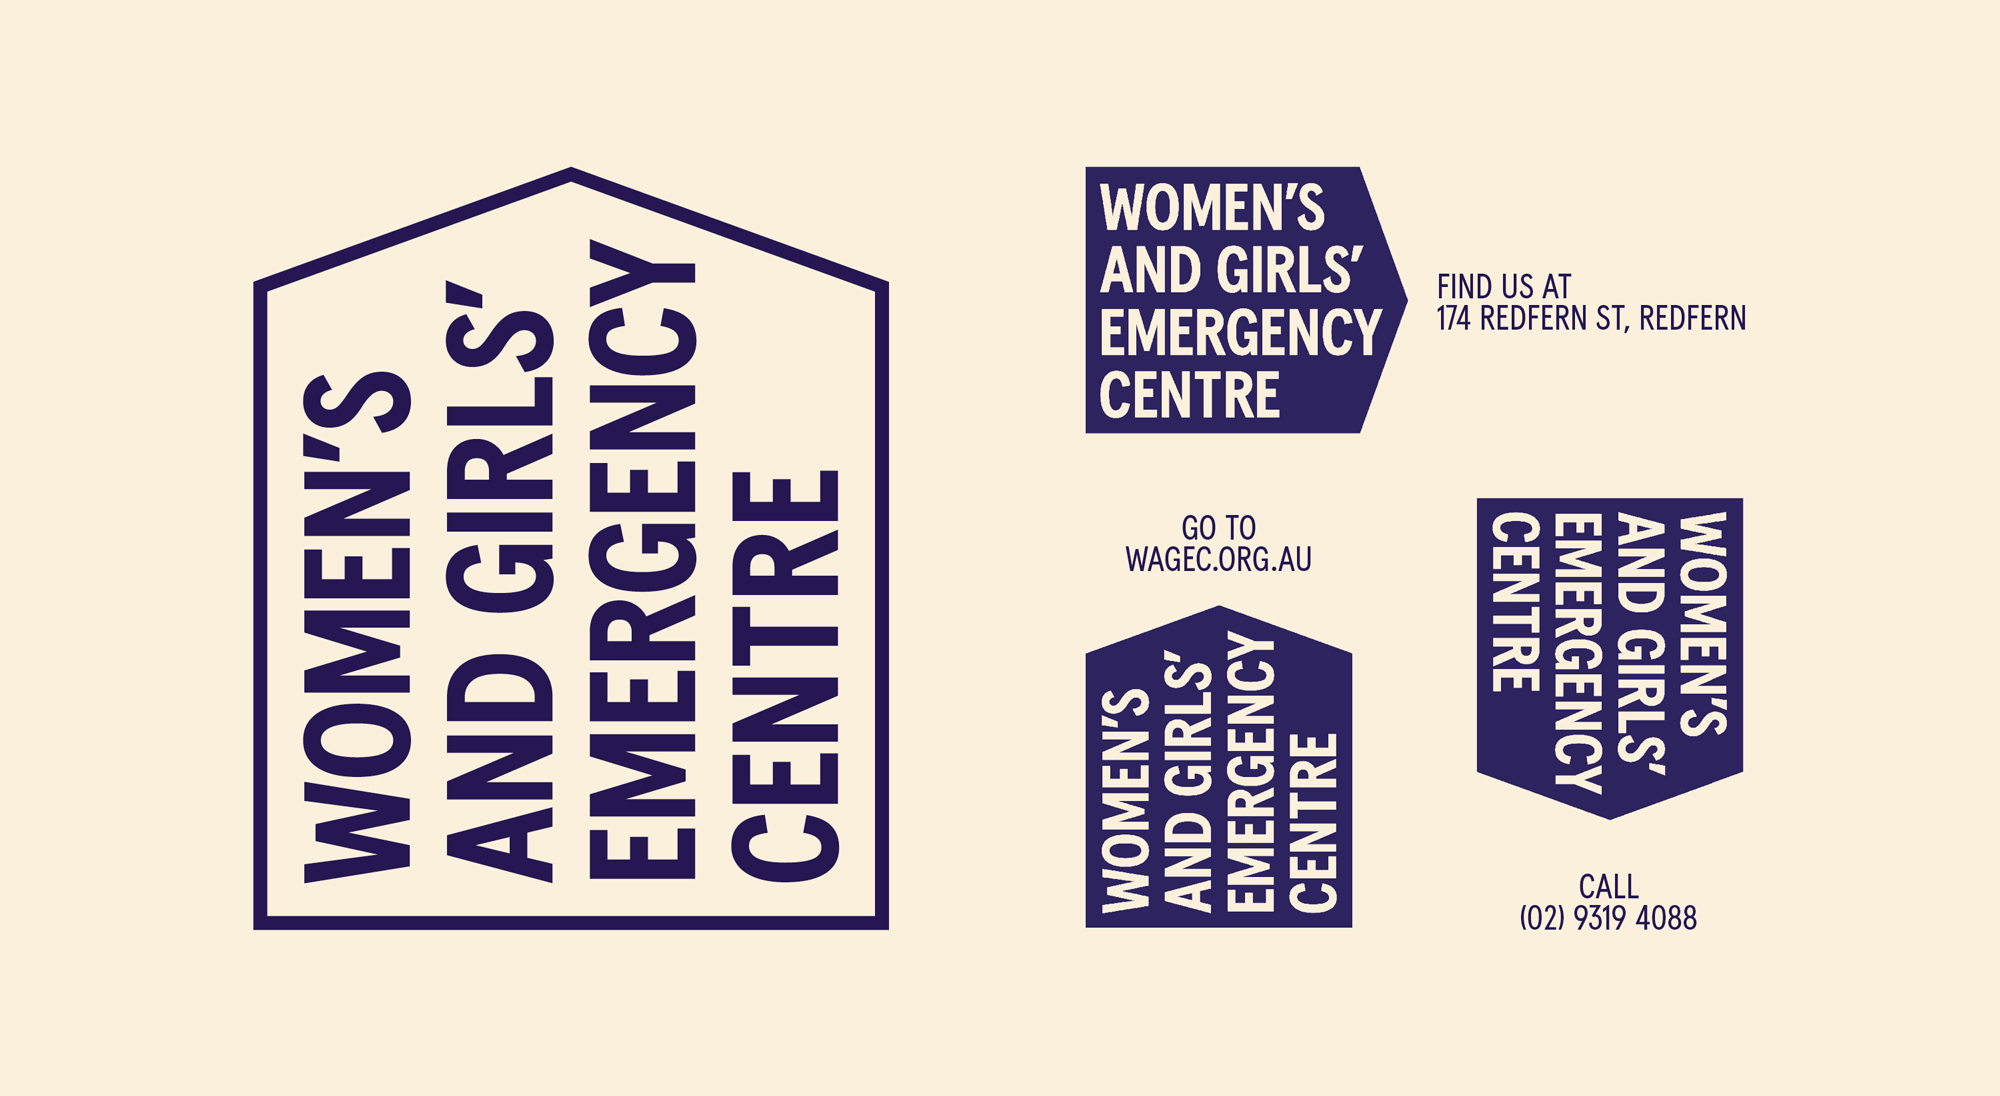 New Logo and Identity for Women's and Girls' Emergency Centre by For The People